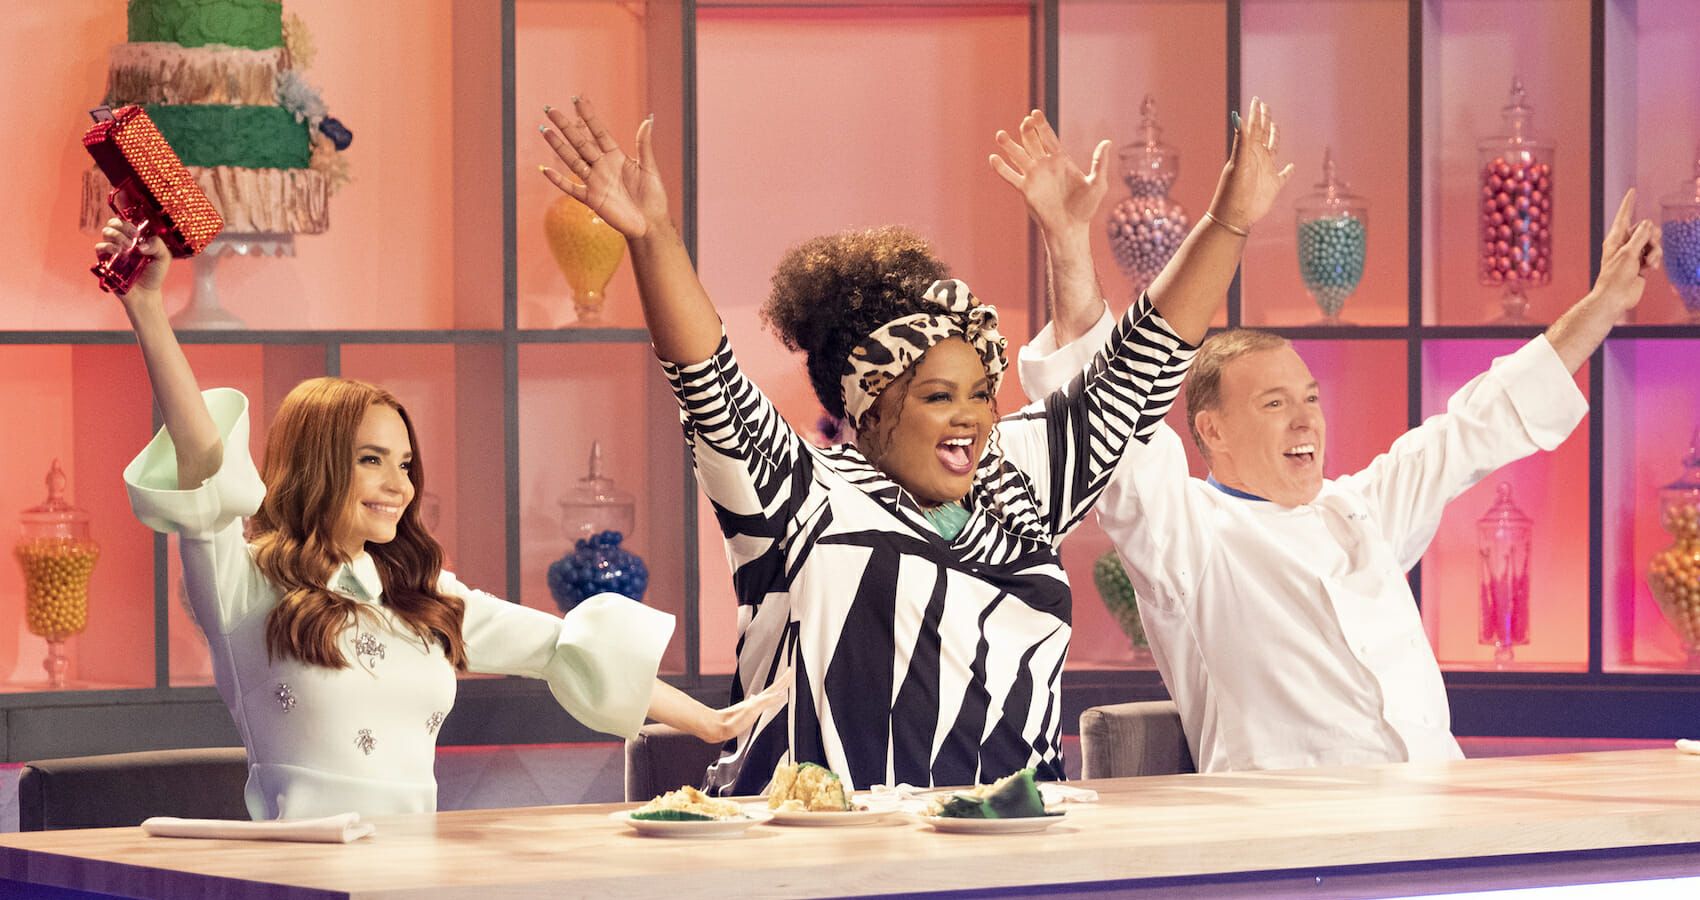 Nicole in the center and chefs to each side celebrate in Nailed It!